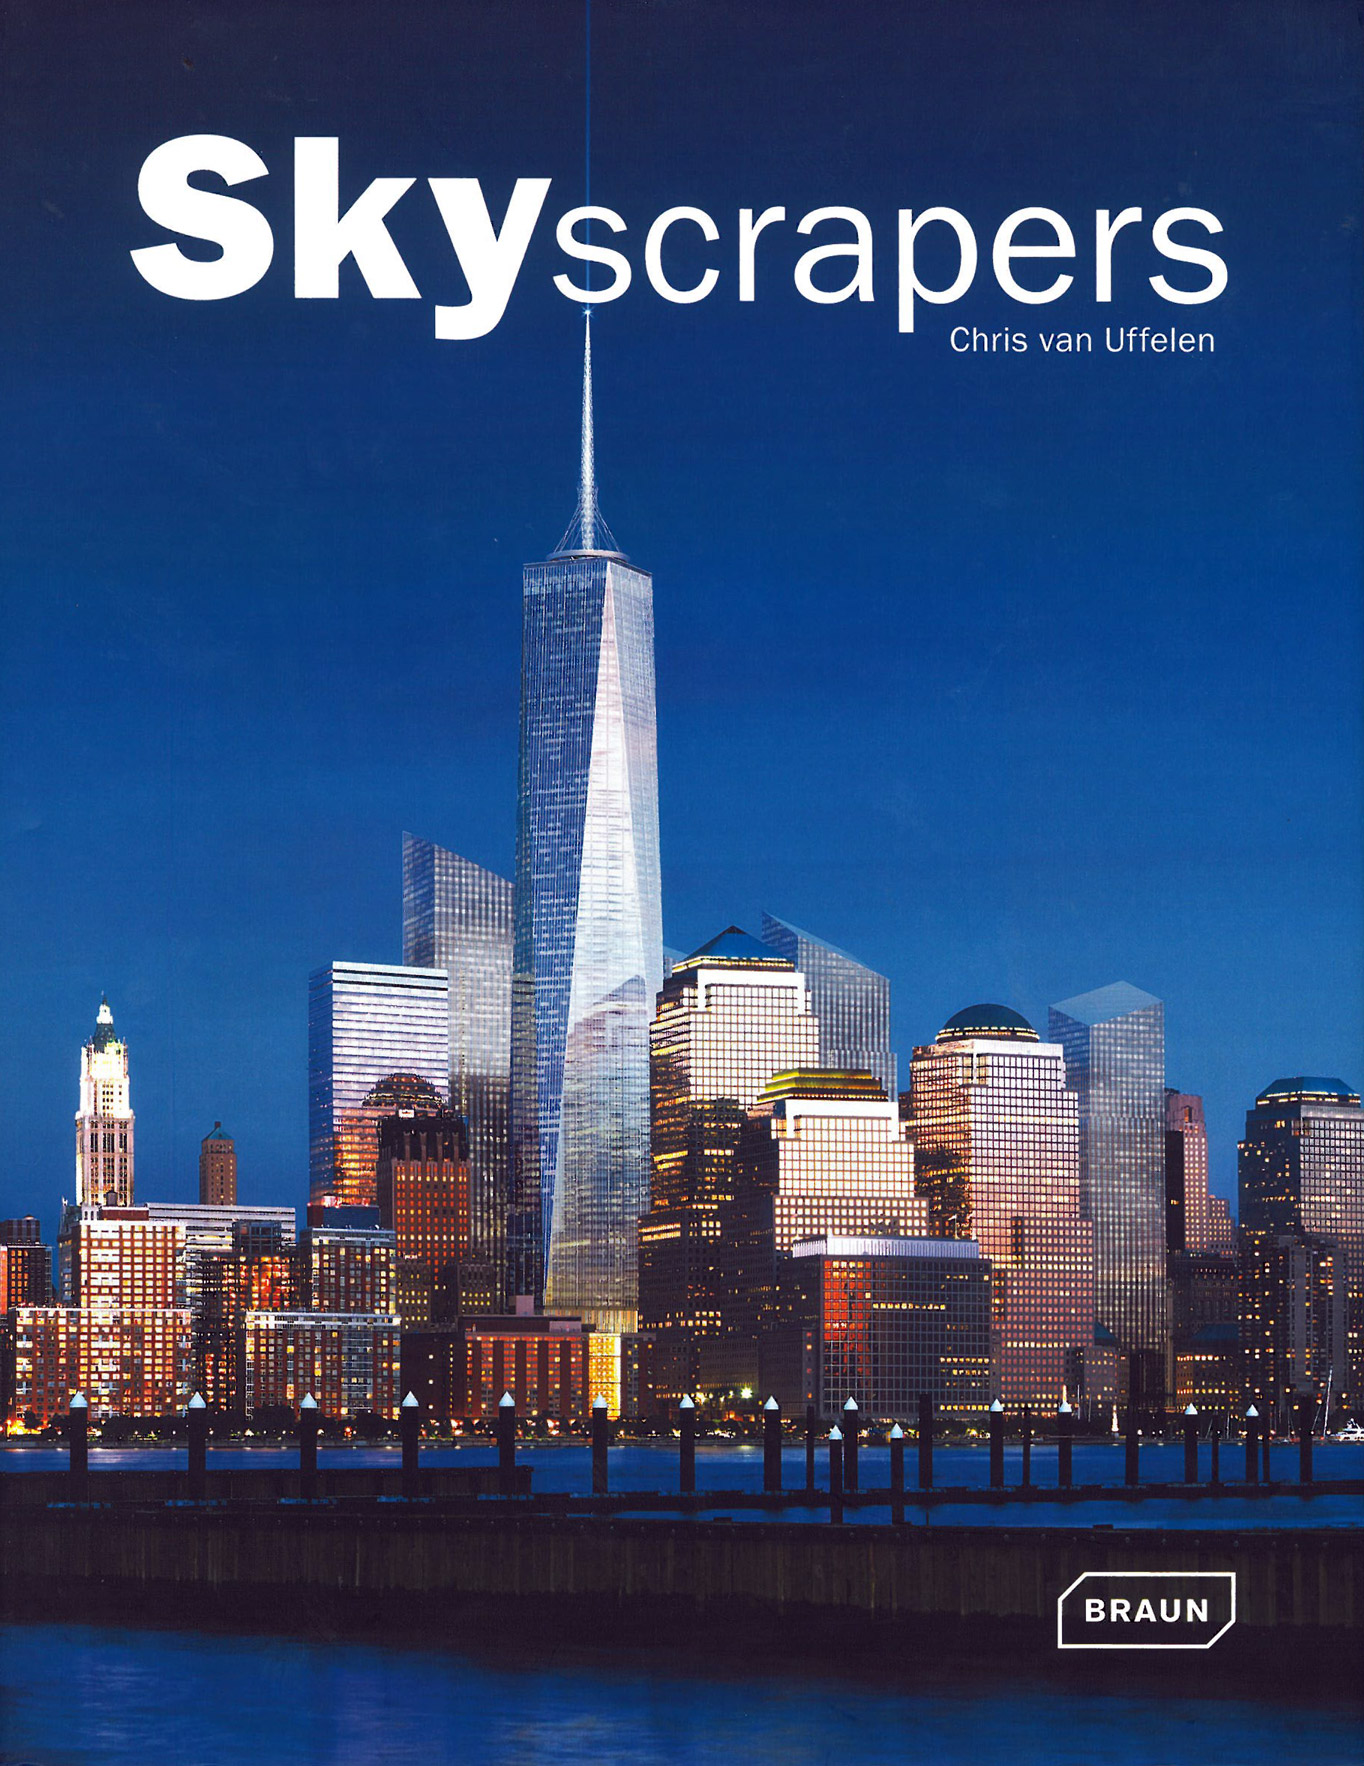 Braun Skyscrapers for NLF 